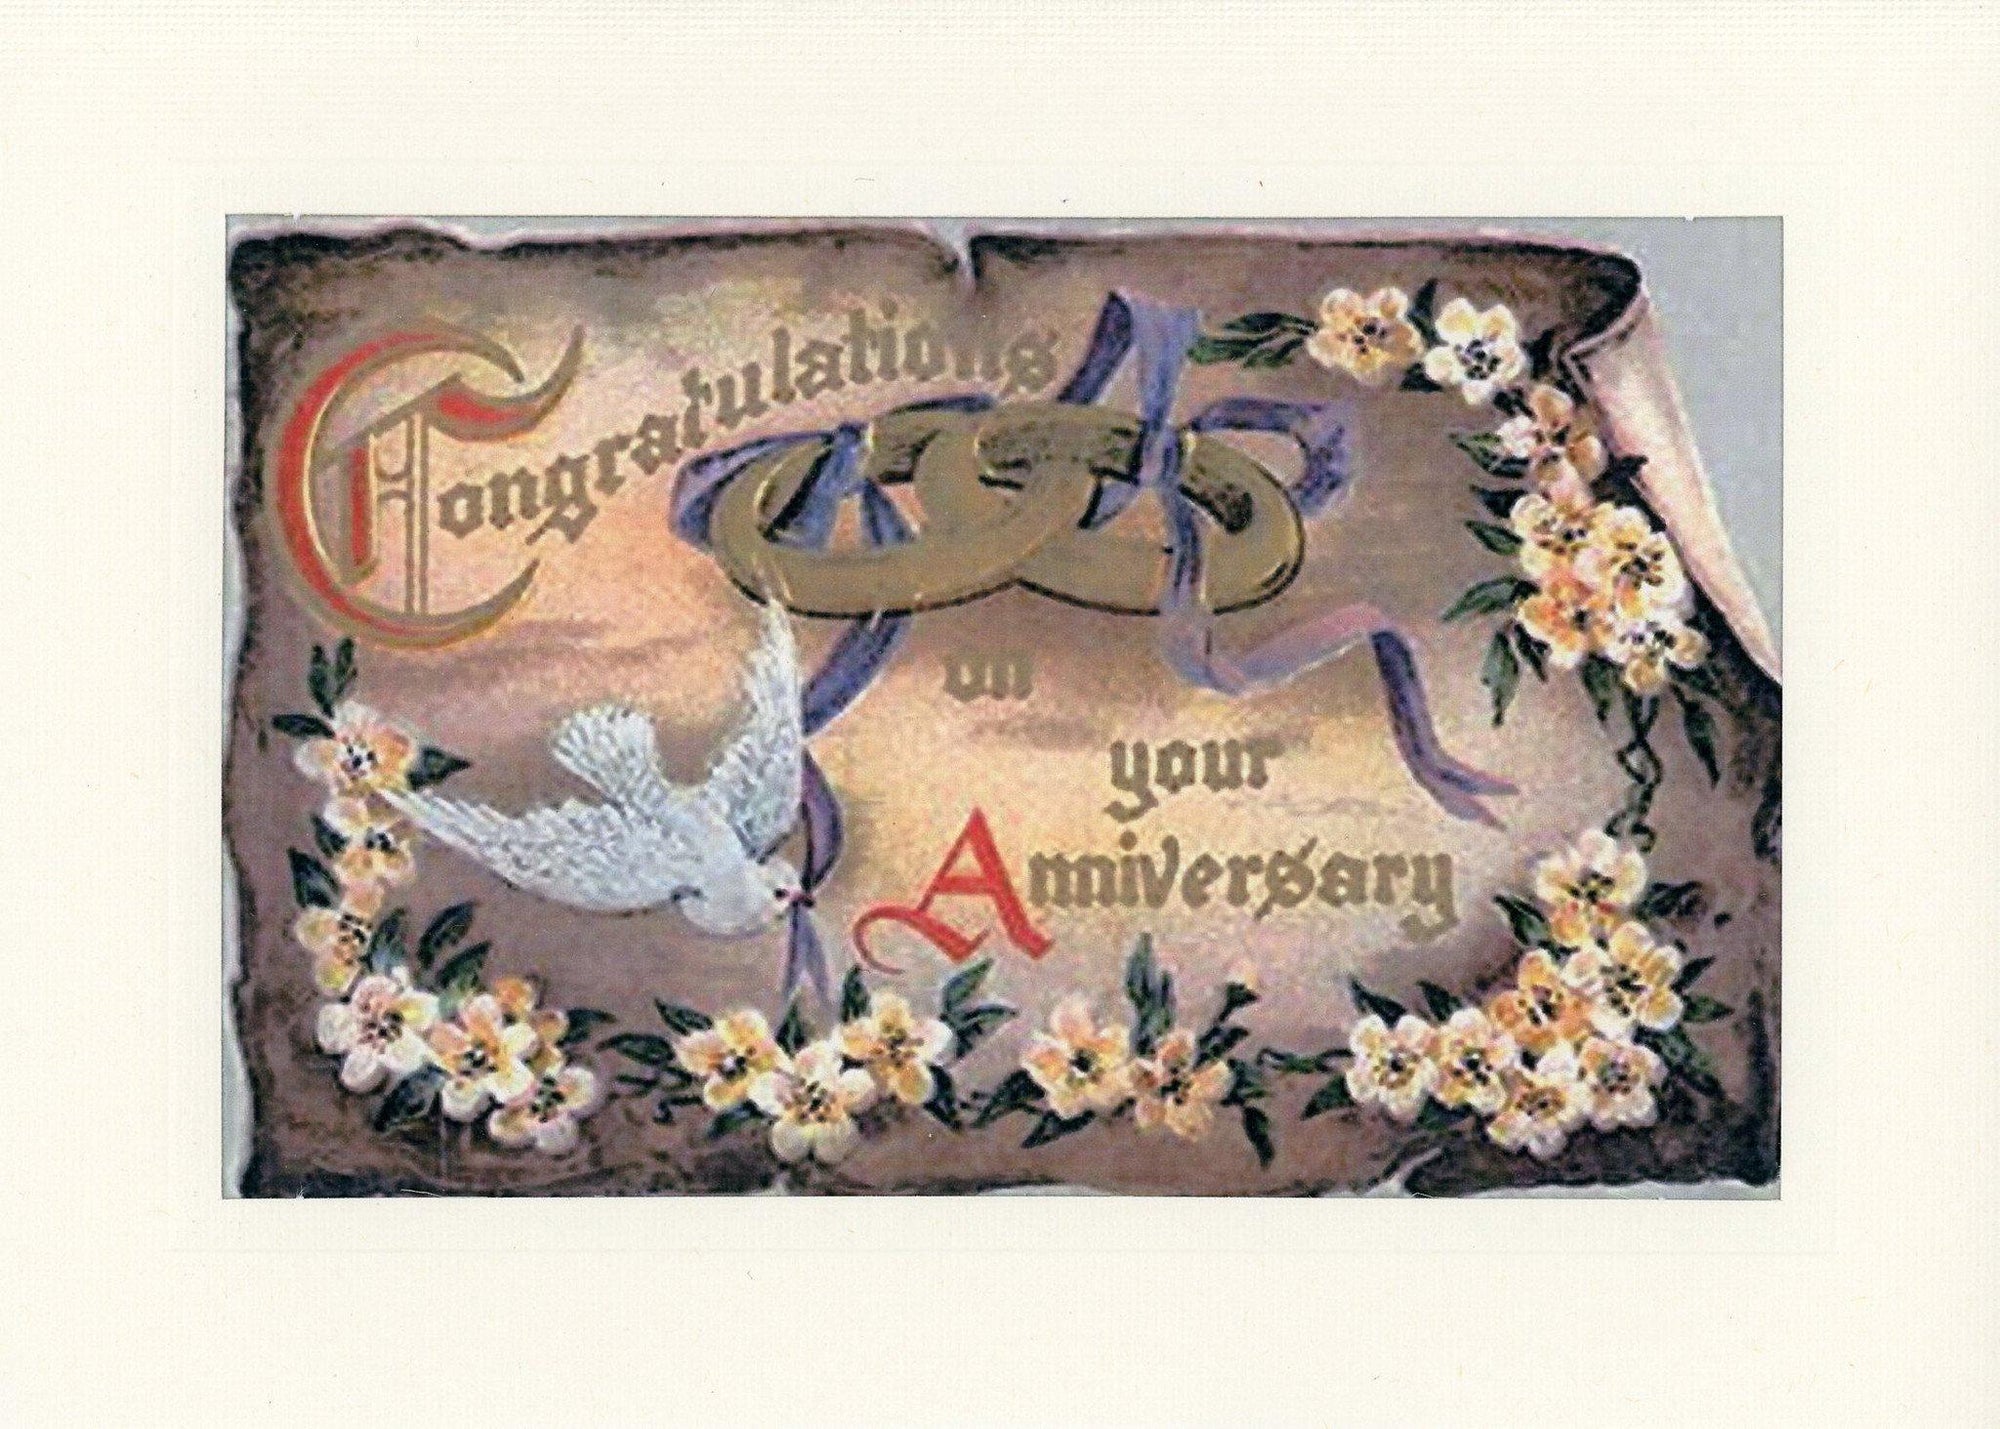 Congratulations on Your Anniversary-Greetings from the Past-Plymouth Cards